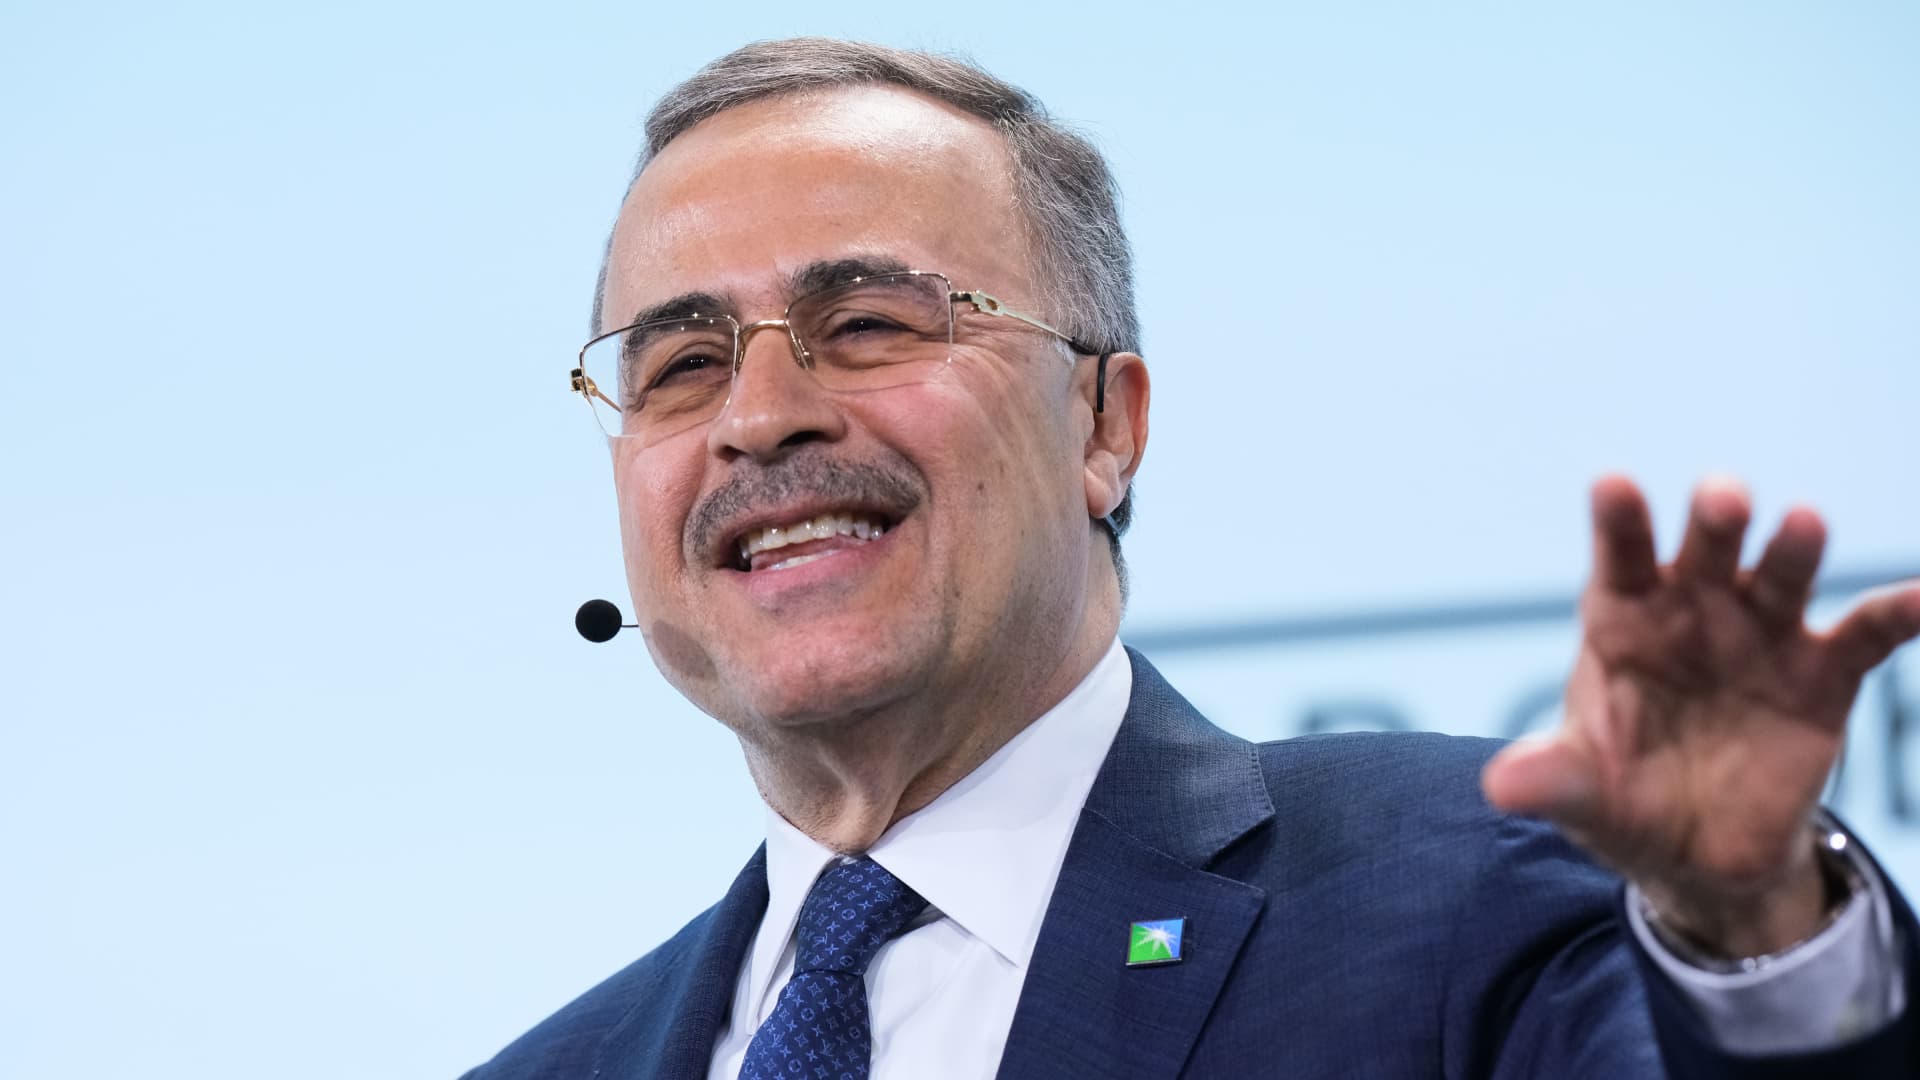 Saudi Aramco CEO says energy transition is failing, world should abandon 'fantasy' of phasing out oil